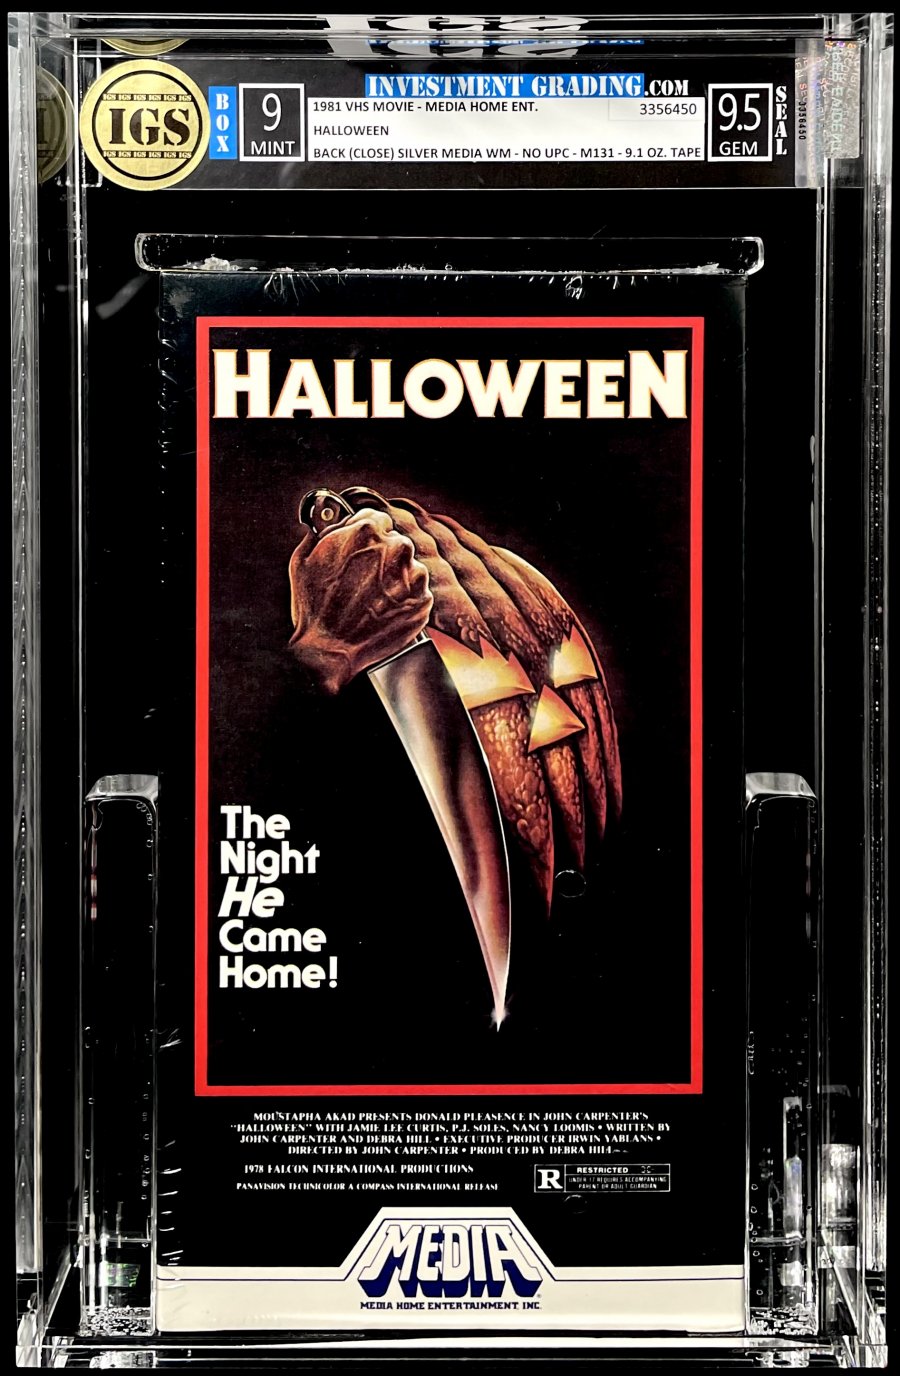 ComicConnect - HALLOWEEN (VHS) VHS - IGS VF/NM: 9.0